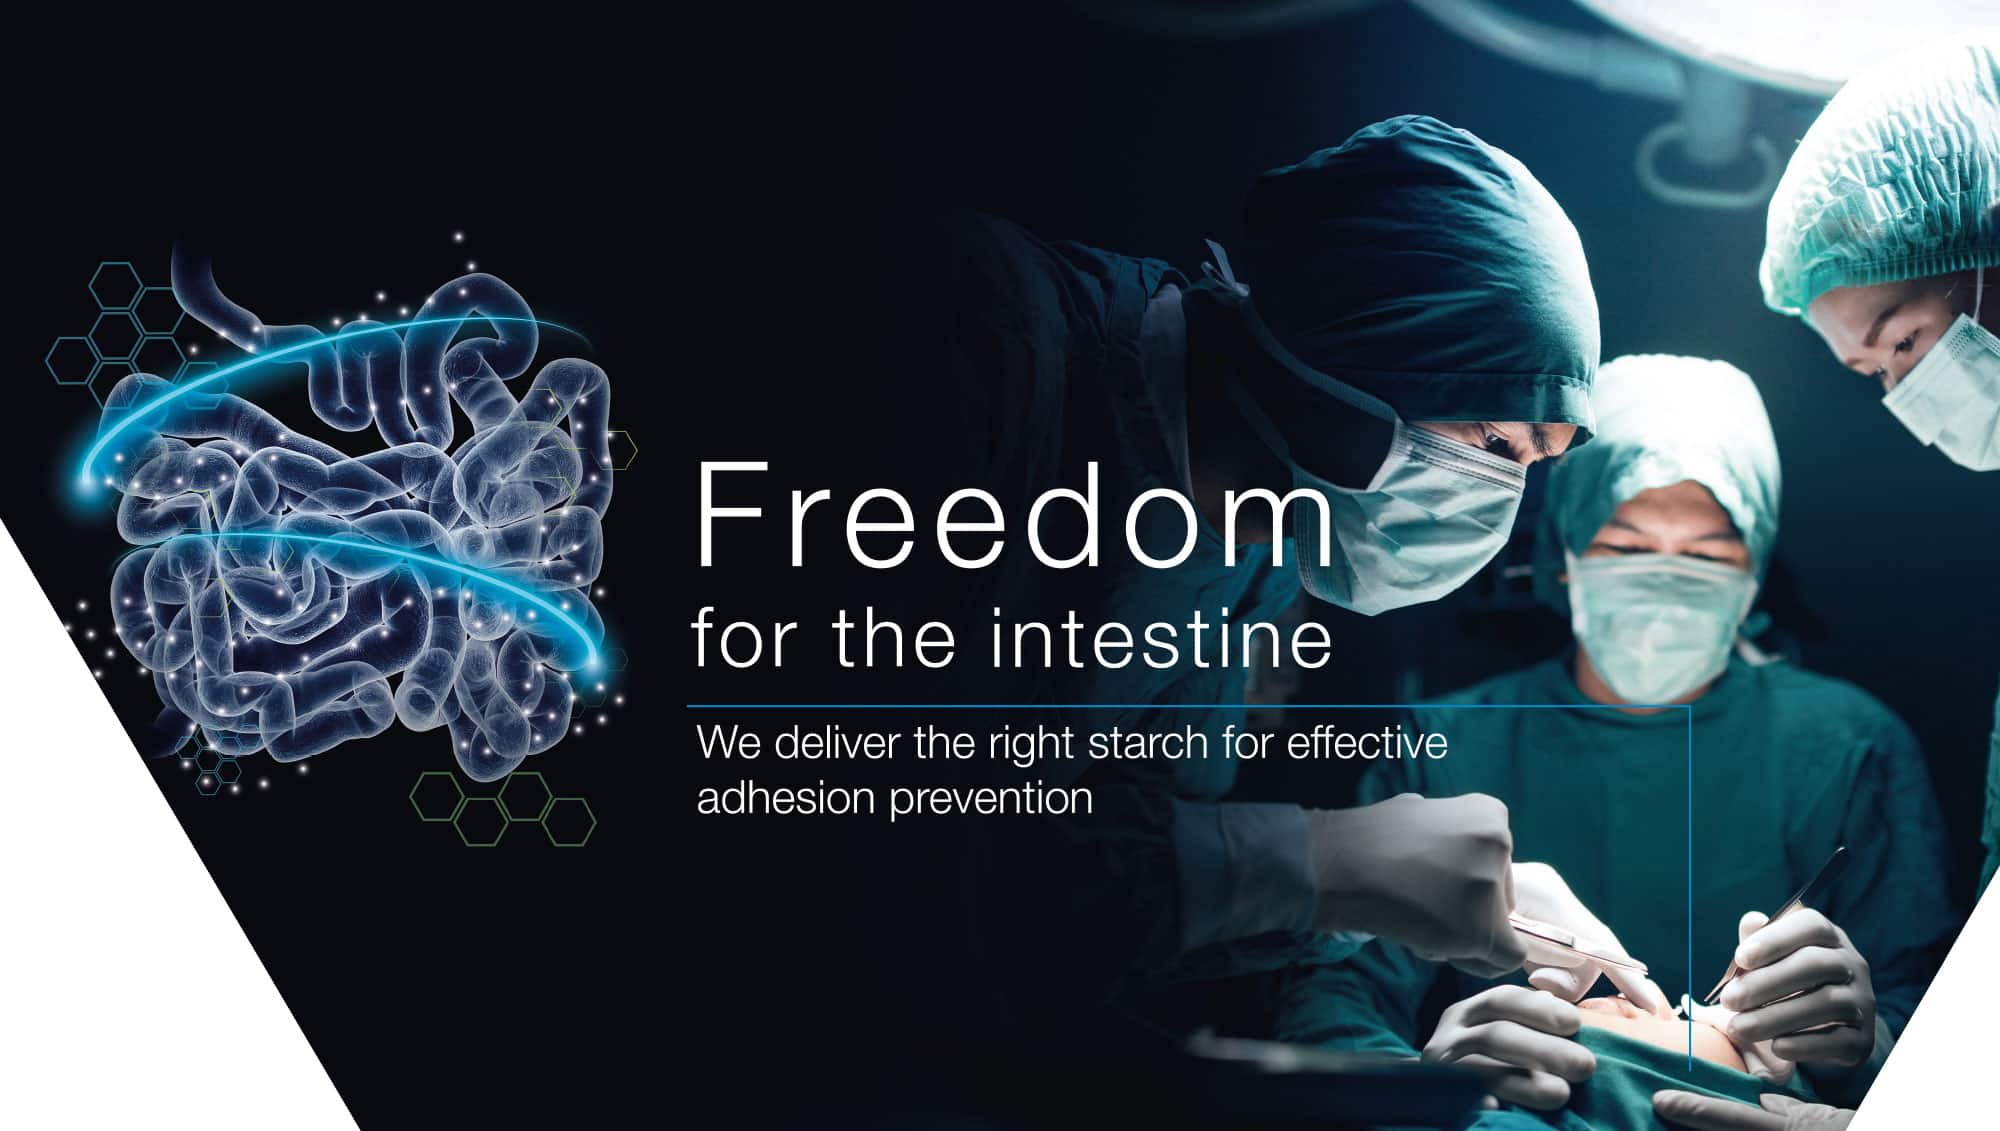 Adhesion prevention: Freedom for the intestine